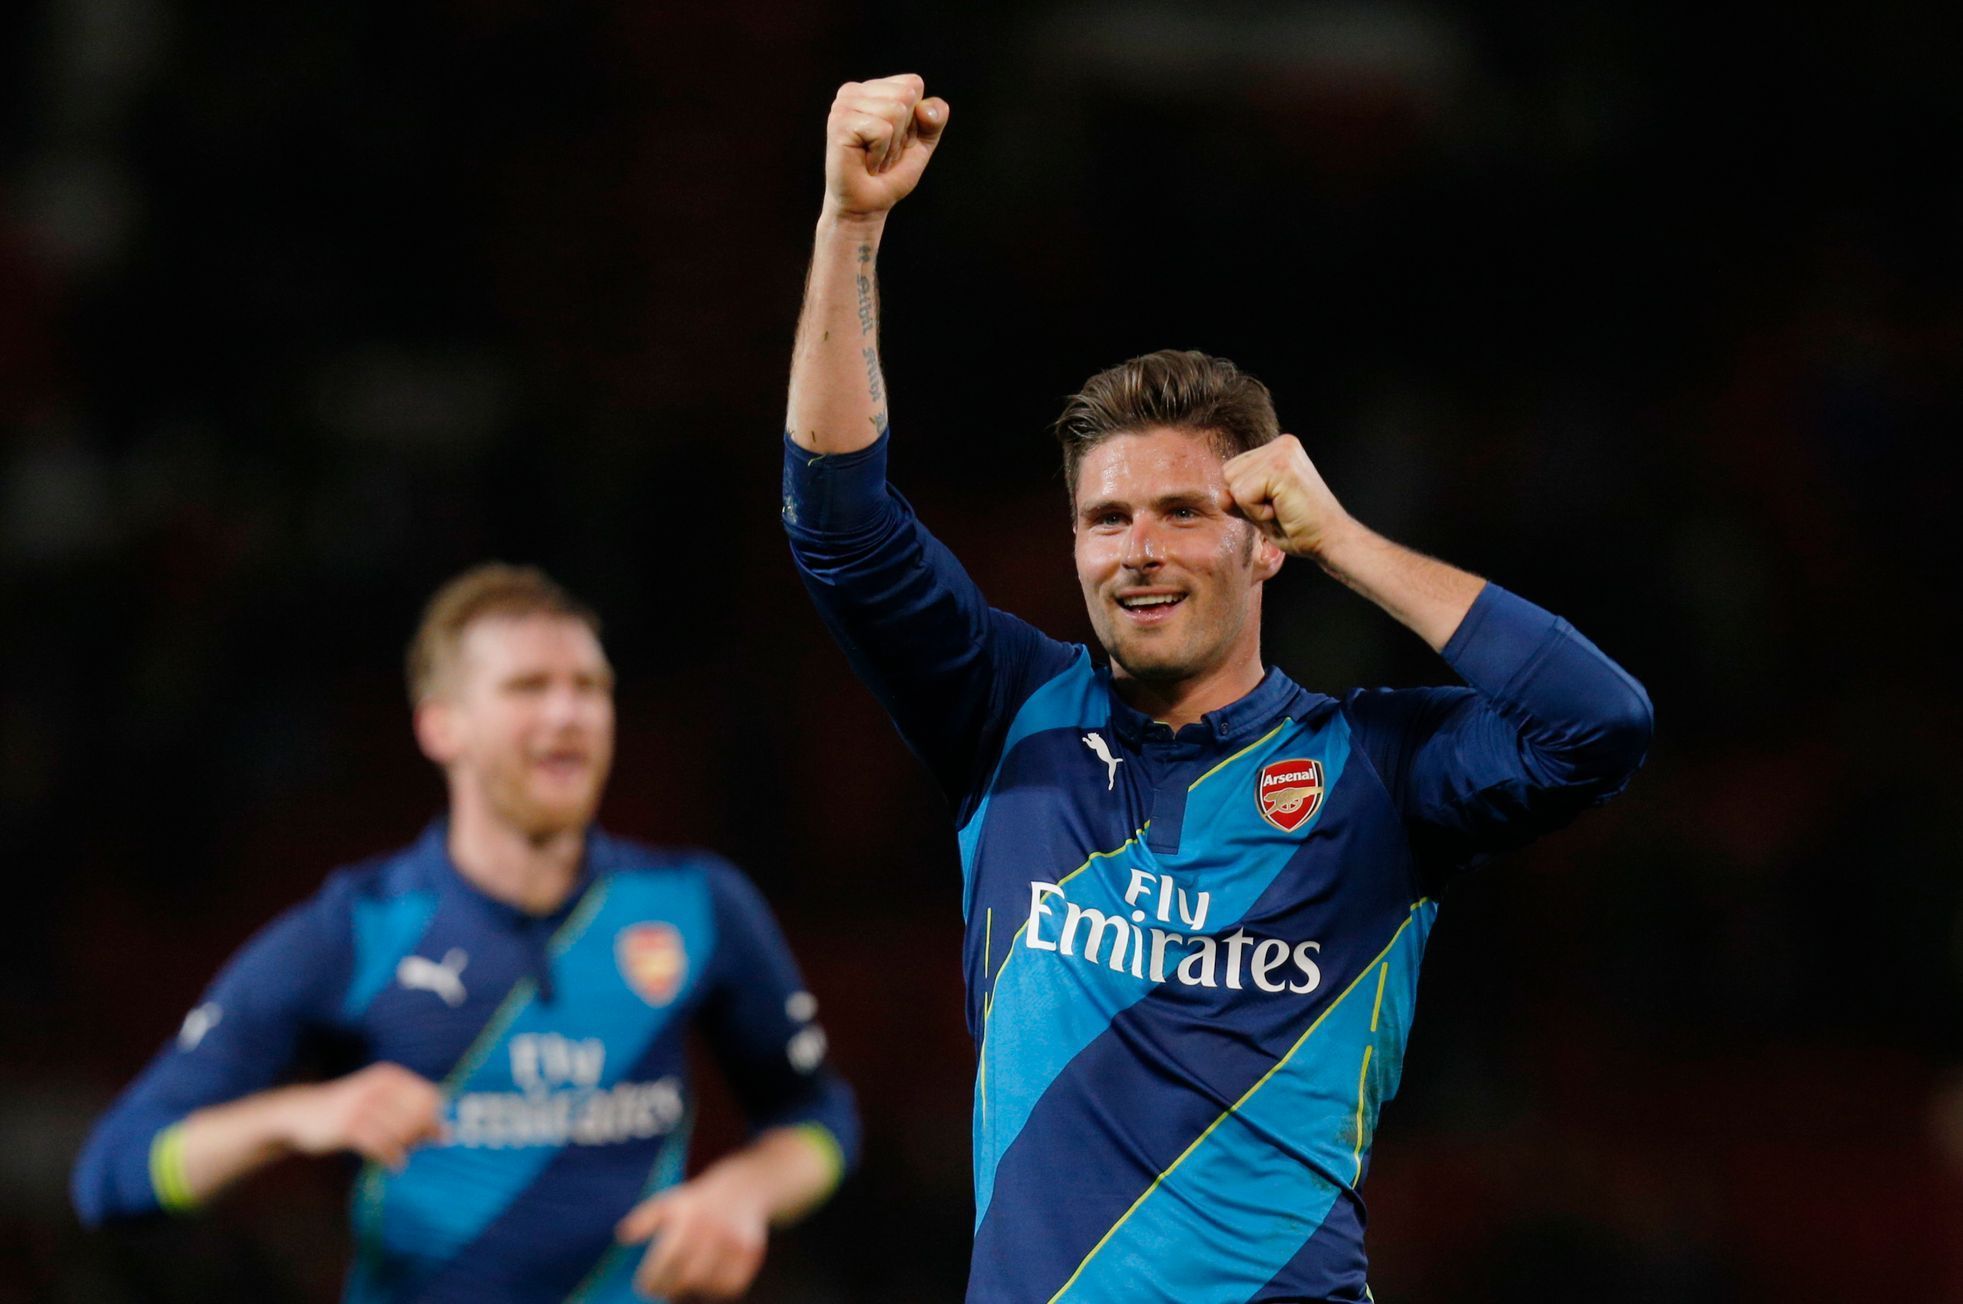 Football: Arsenal's Olivier Giroud celebrates after the match